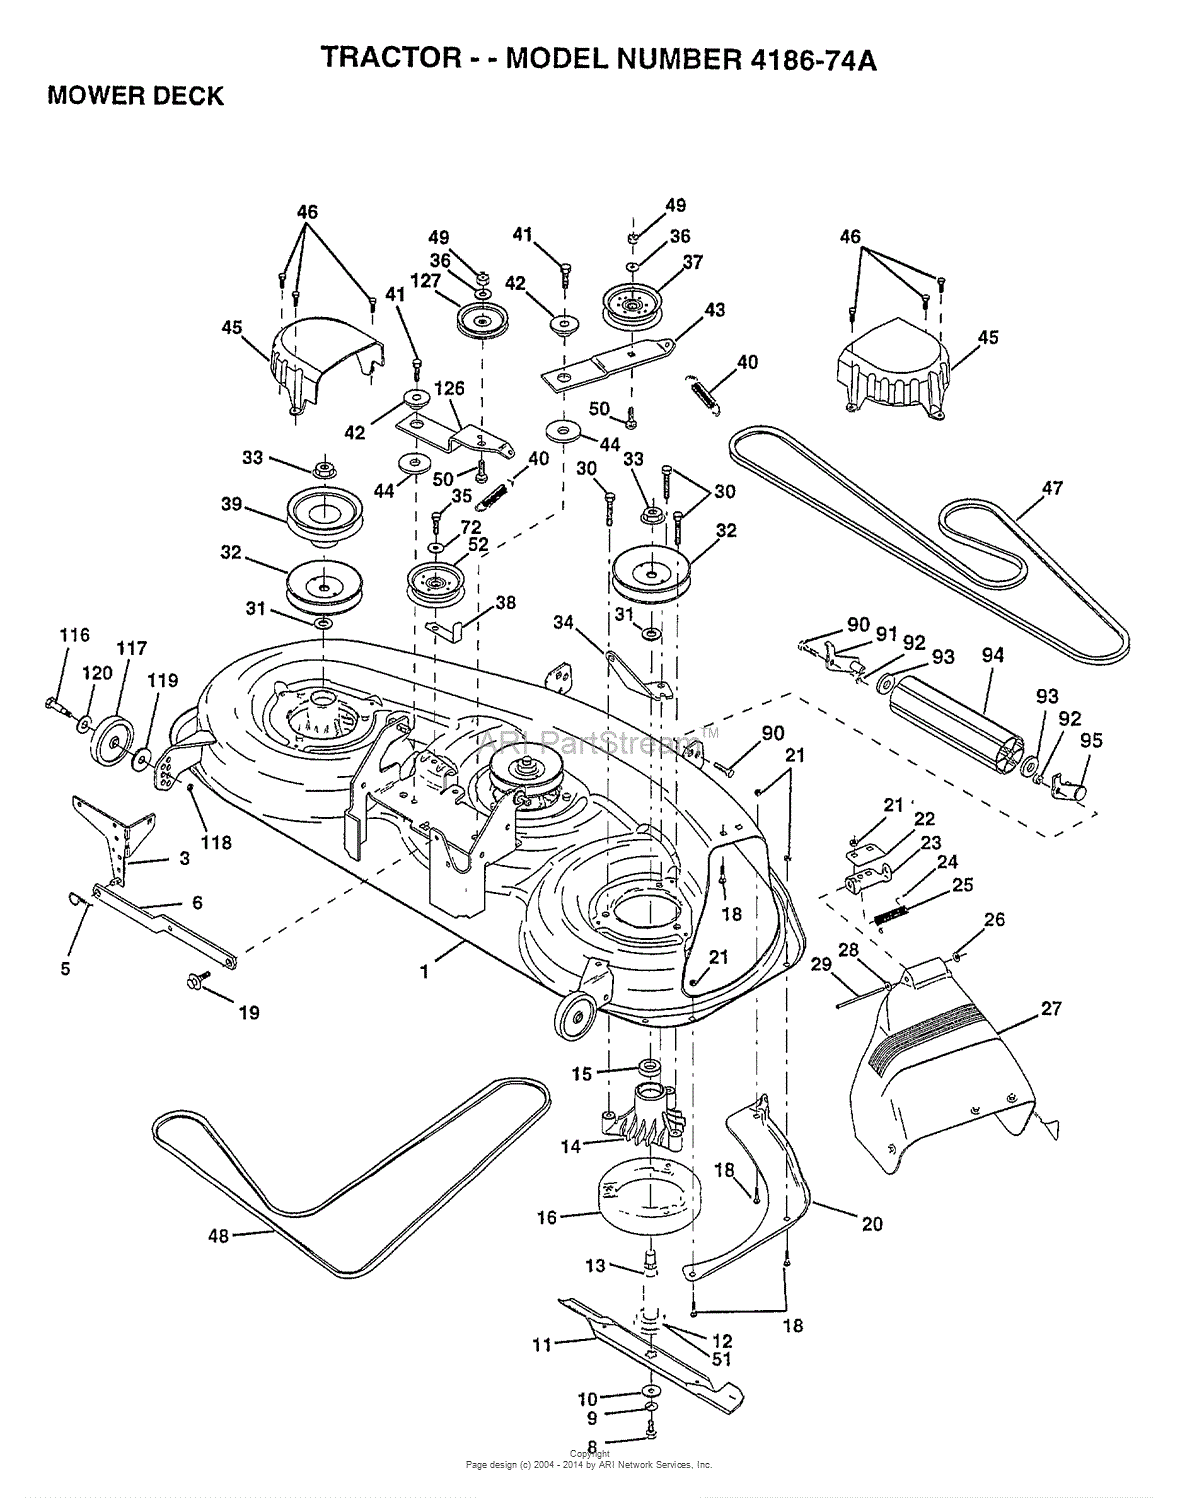 AYP/Electrolux 4186-74A (1997) Parts Diagram for MOWER DECK